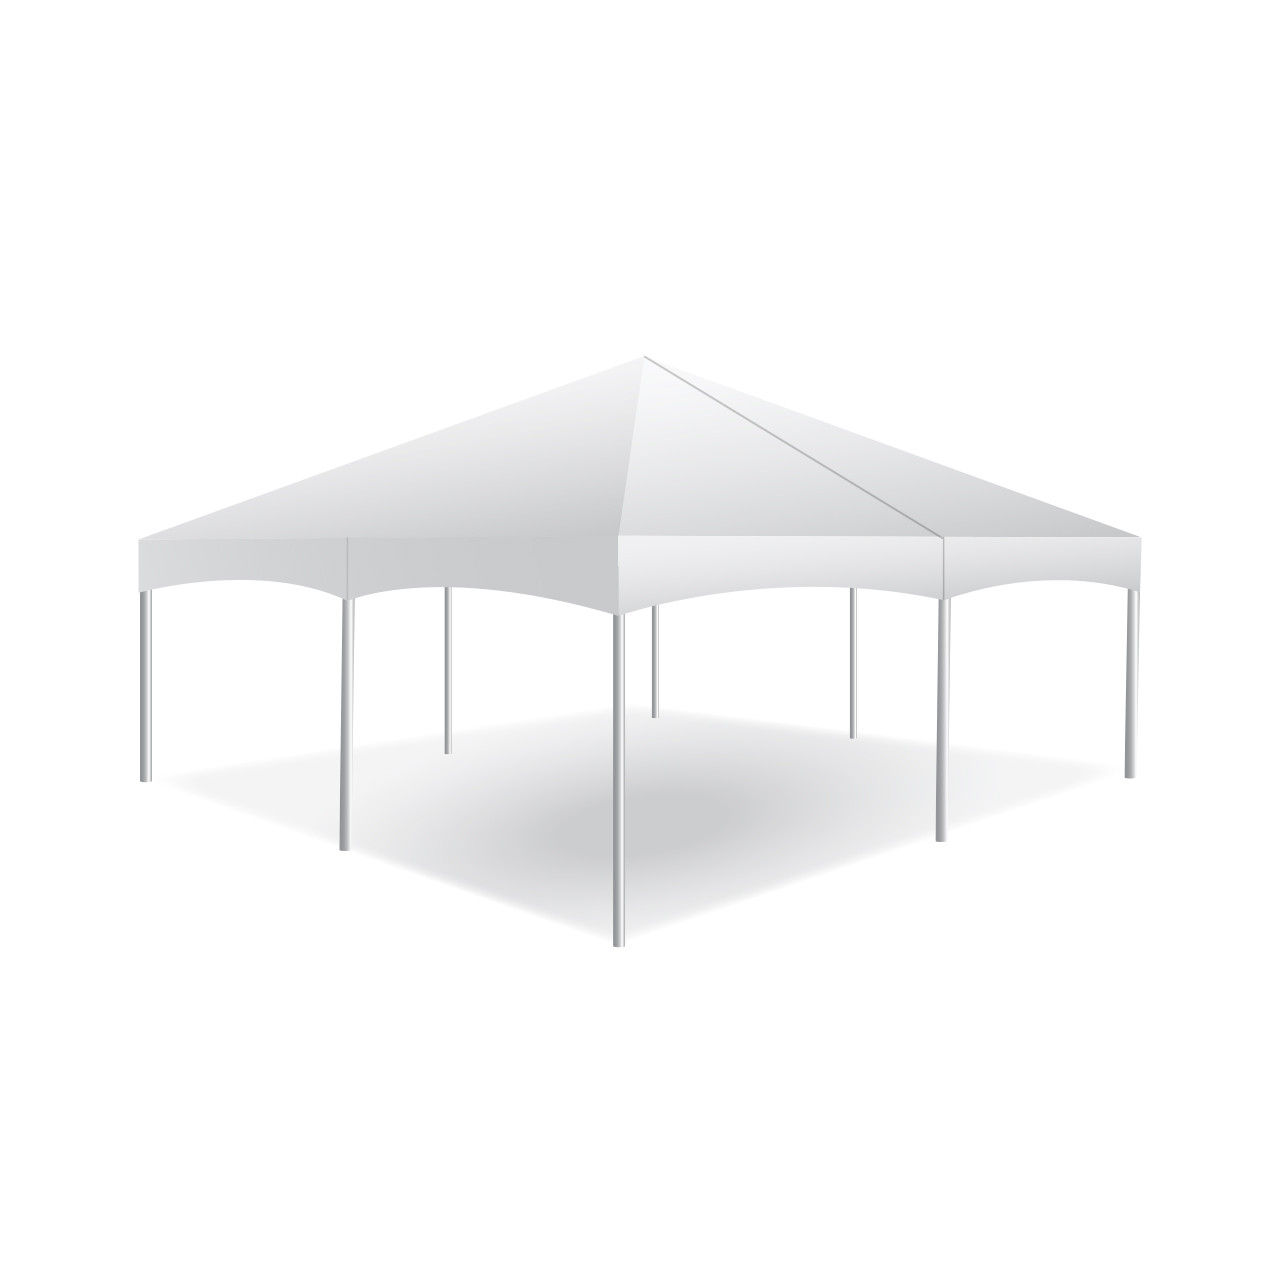 20' x 20' Master Series Frame Tent, Sectional Tent Top, Complete